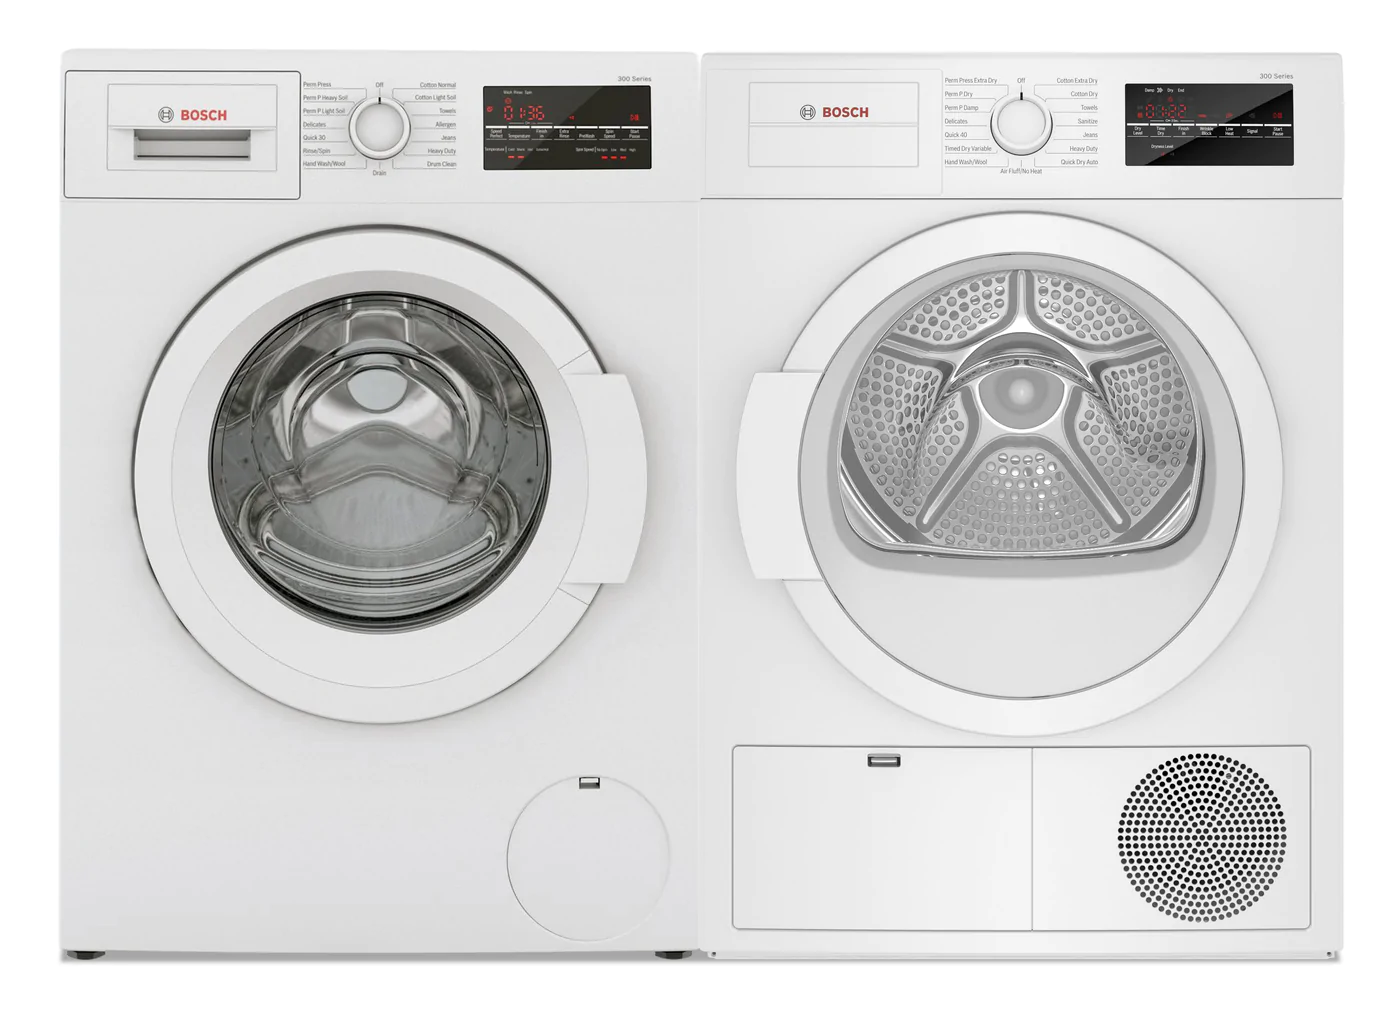 Bosch 300 Series Washer Manual